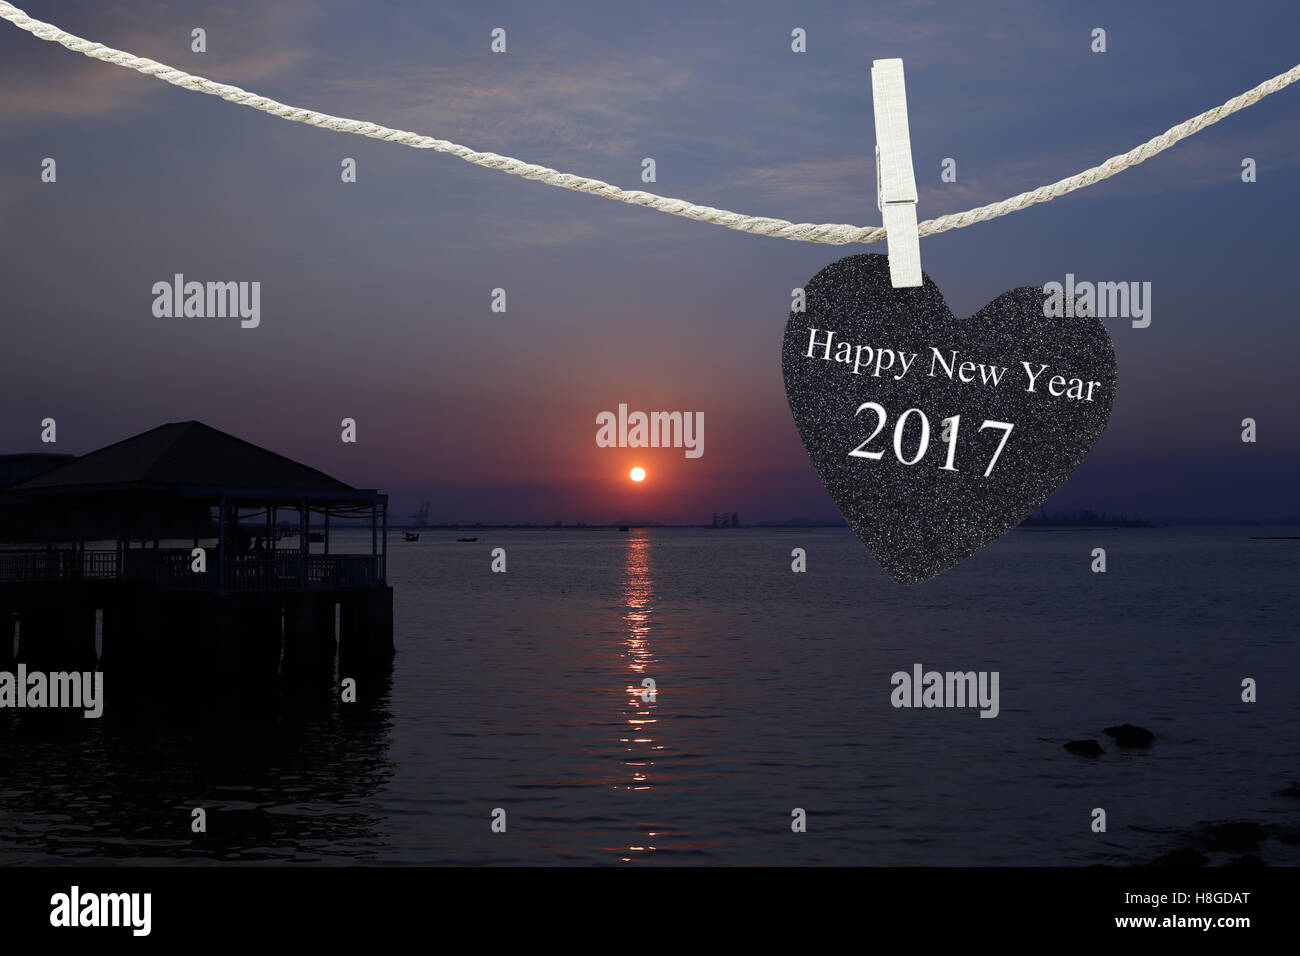 Black Heart hung on hemp rope on sunrise background and have Happy new year 2017 text. Stock Photo